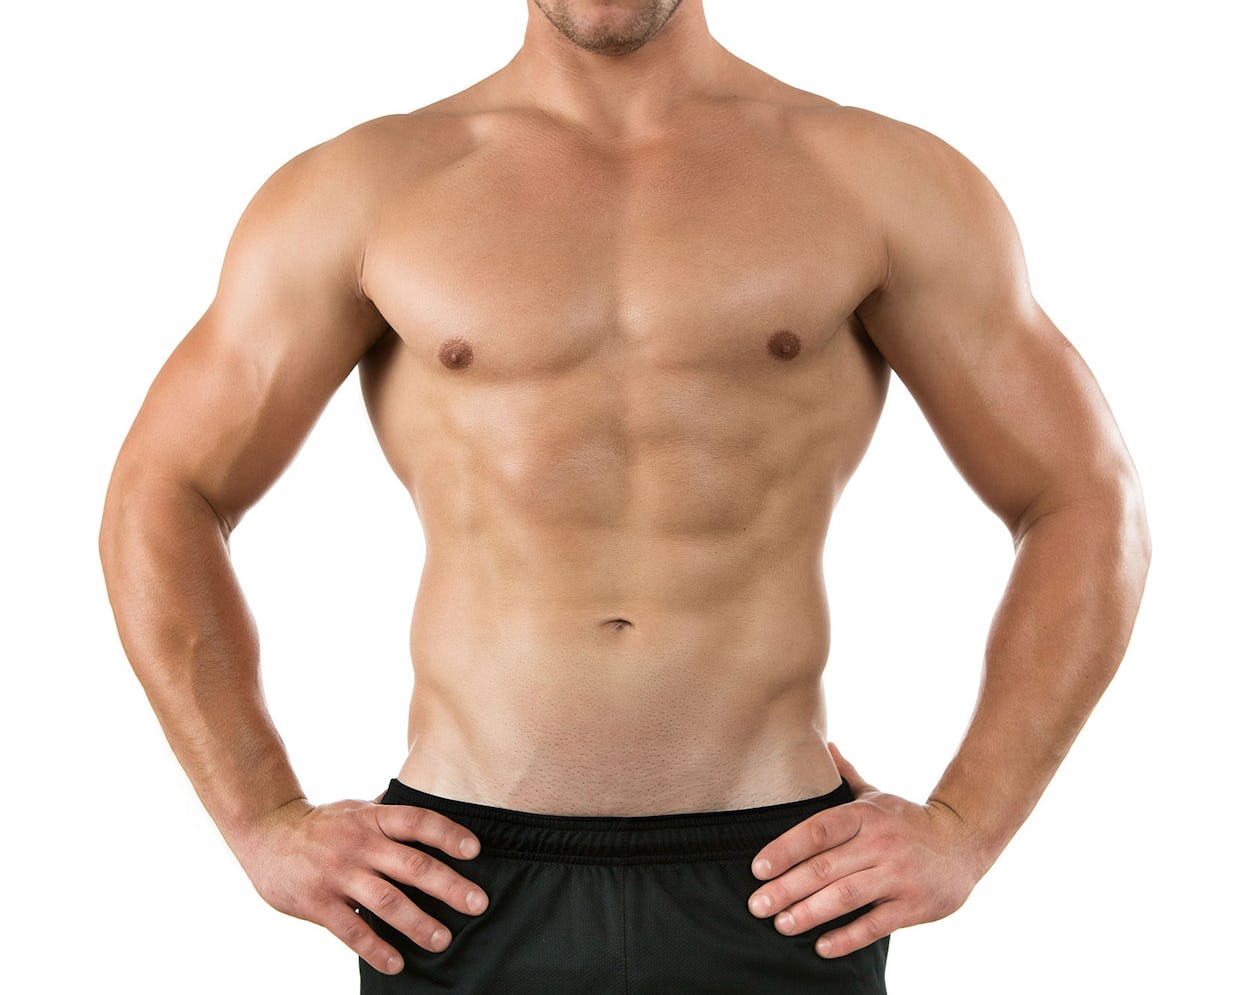 7 Lower Pec Workouts to Power Up Your Lower Chest